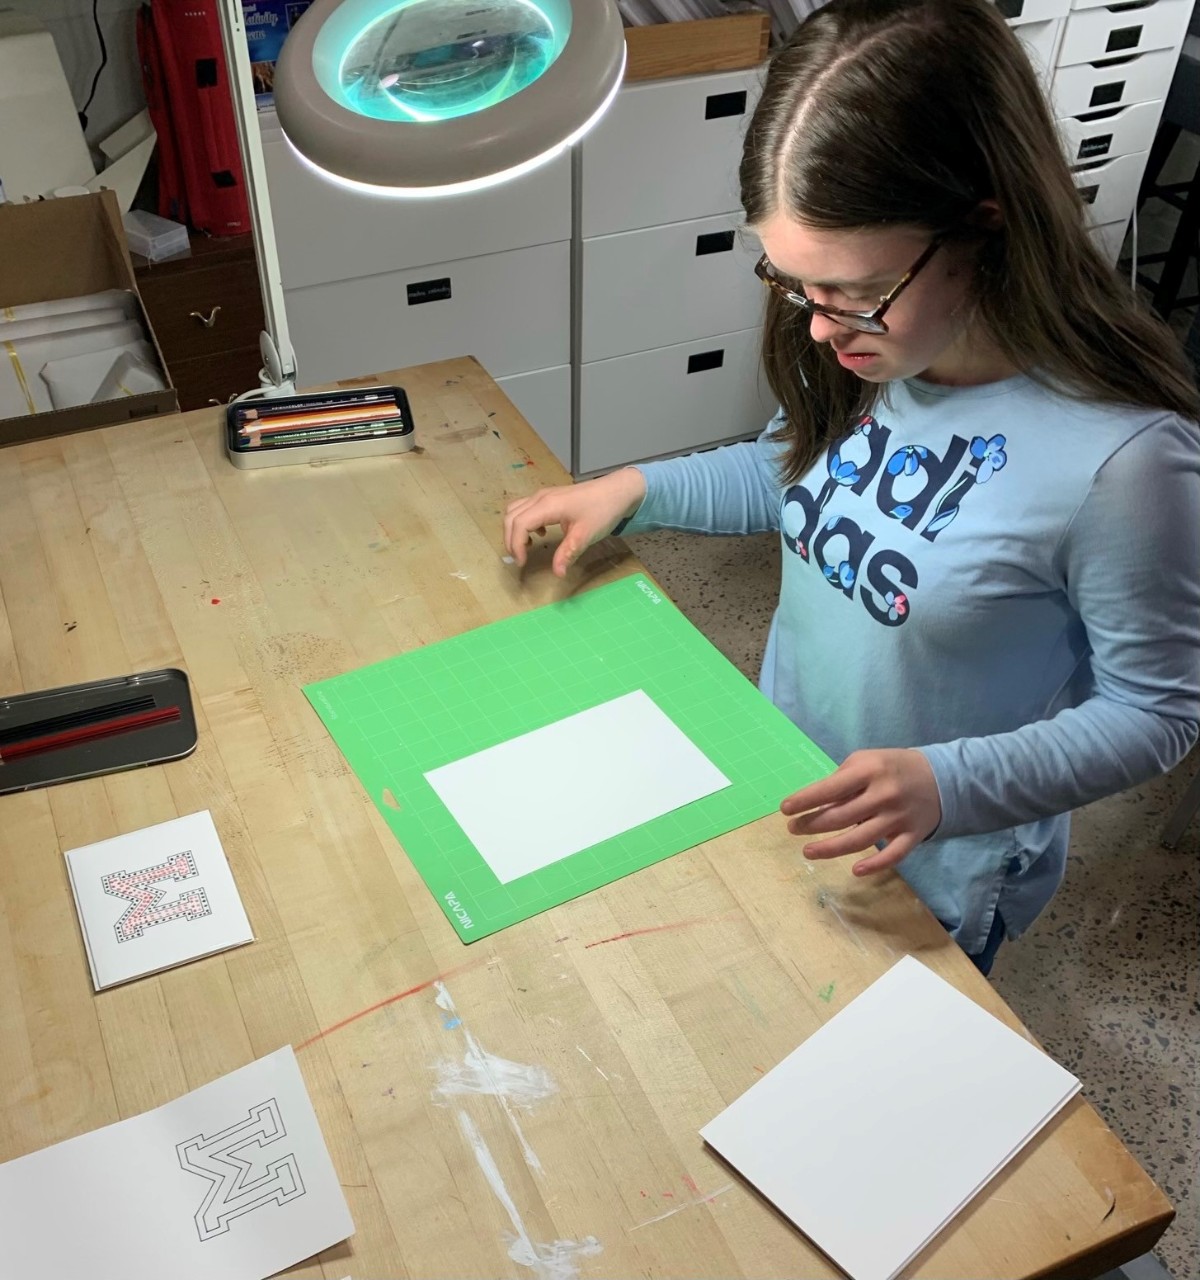 Marie is a teen with Down syndrome, long brown hair, glasses and a blue shirt. She stands and looks down at a worktable with two pieces of paper on it.